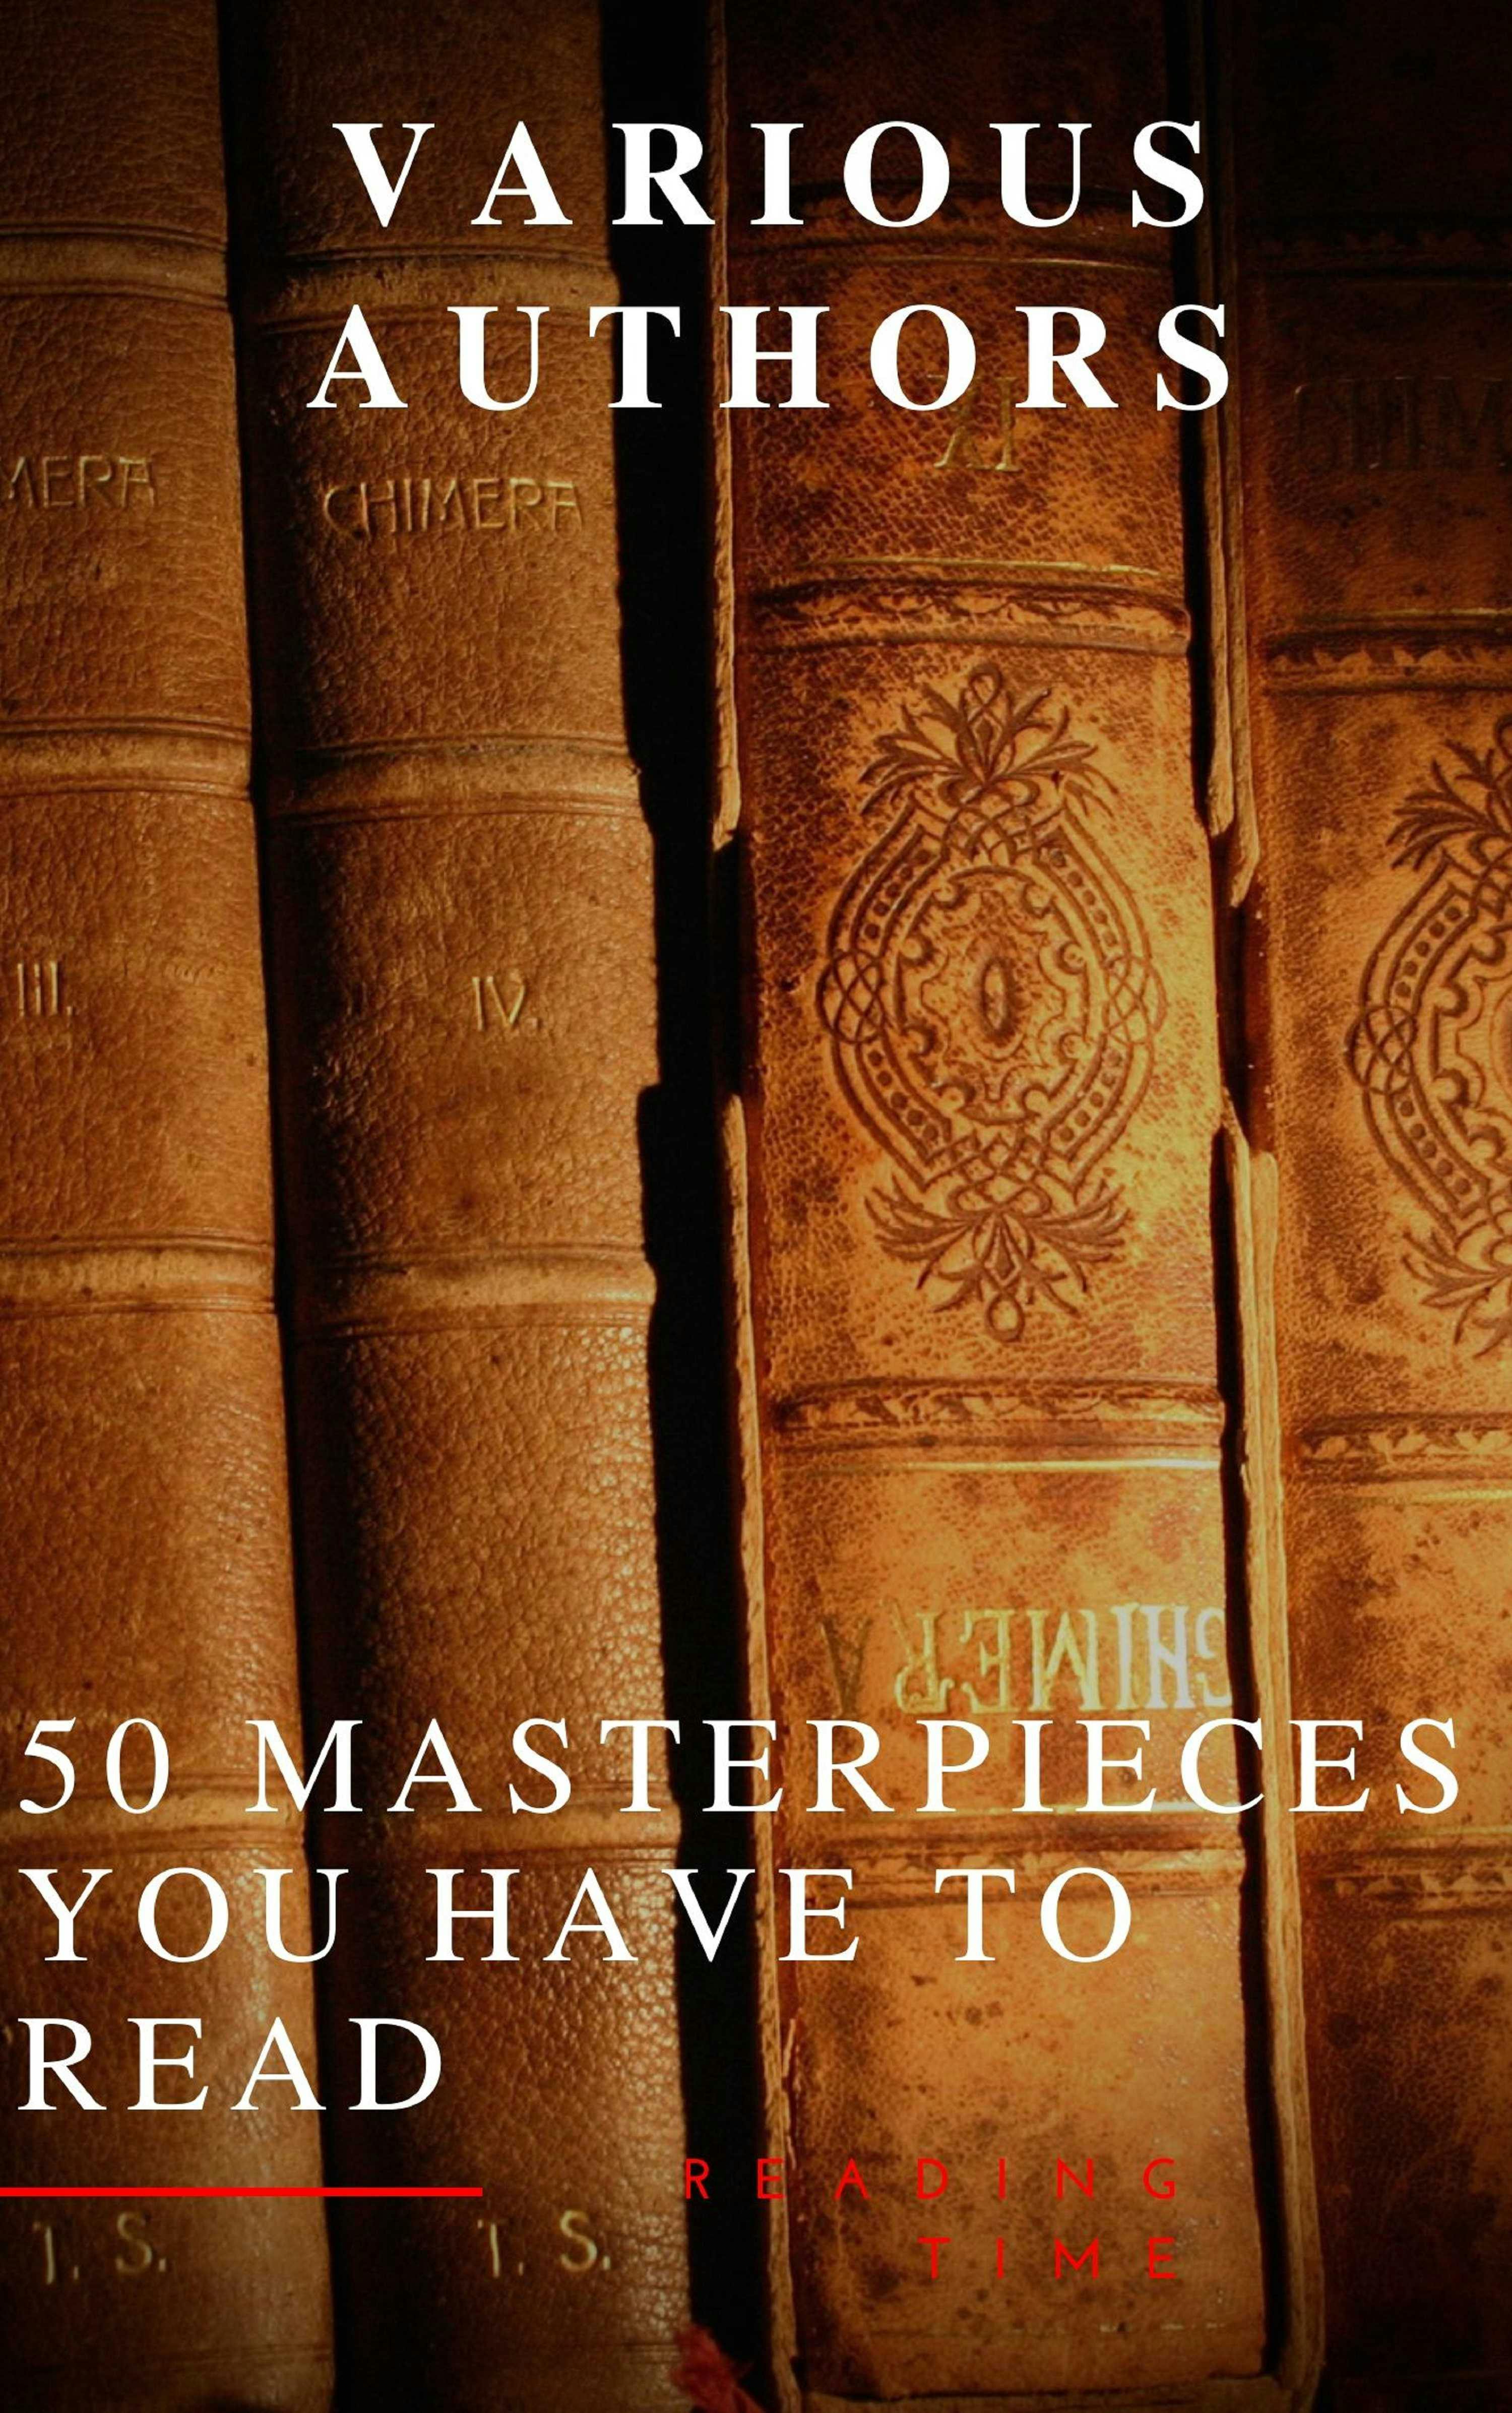 50 Masterpieces you have to read - undefined